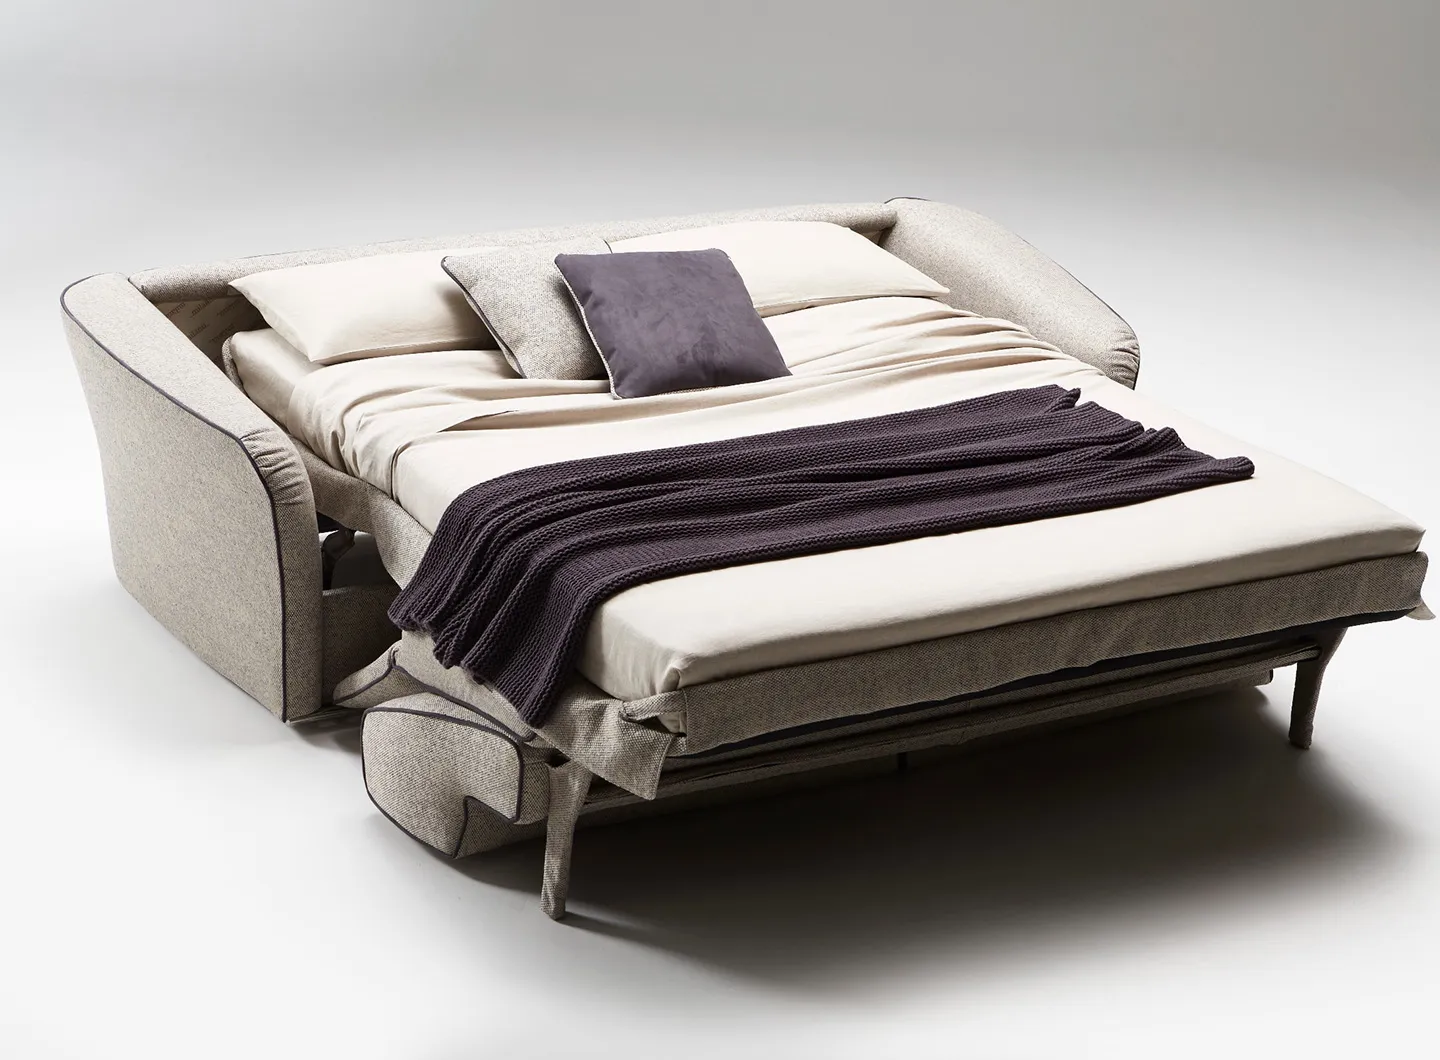 Milano Bedding - Groove sofa bed